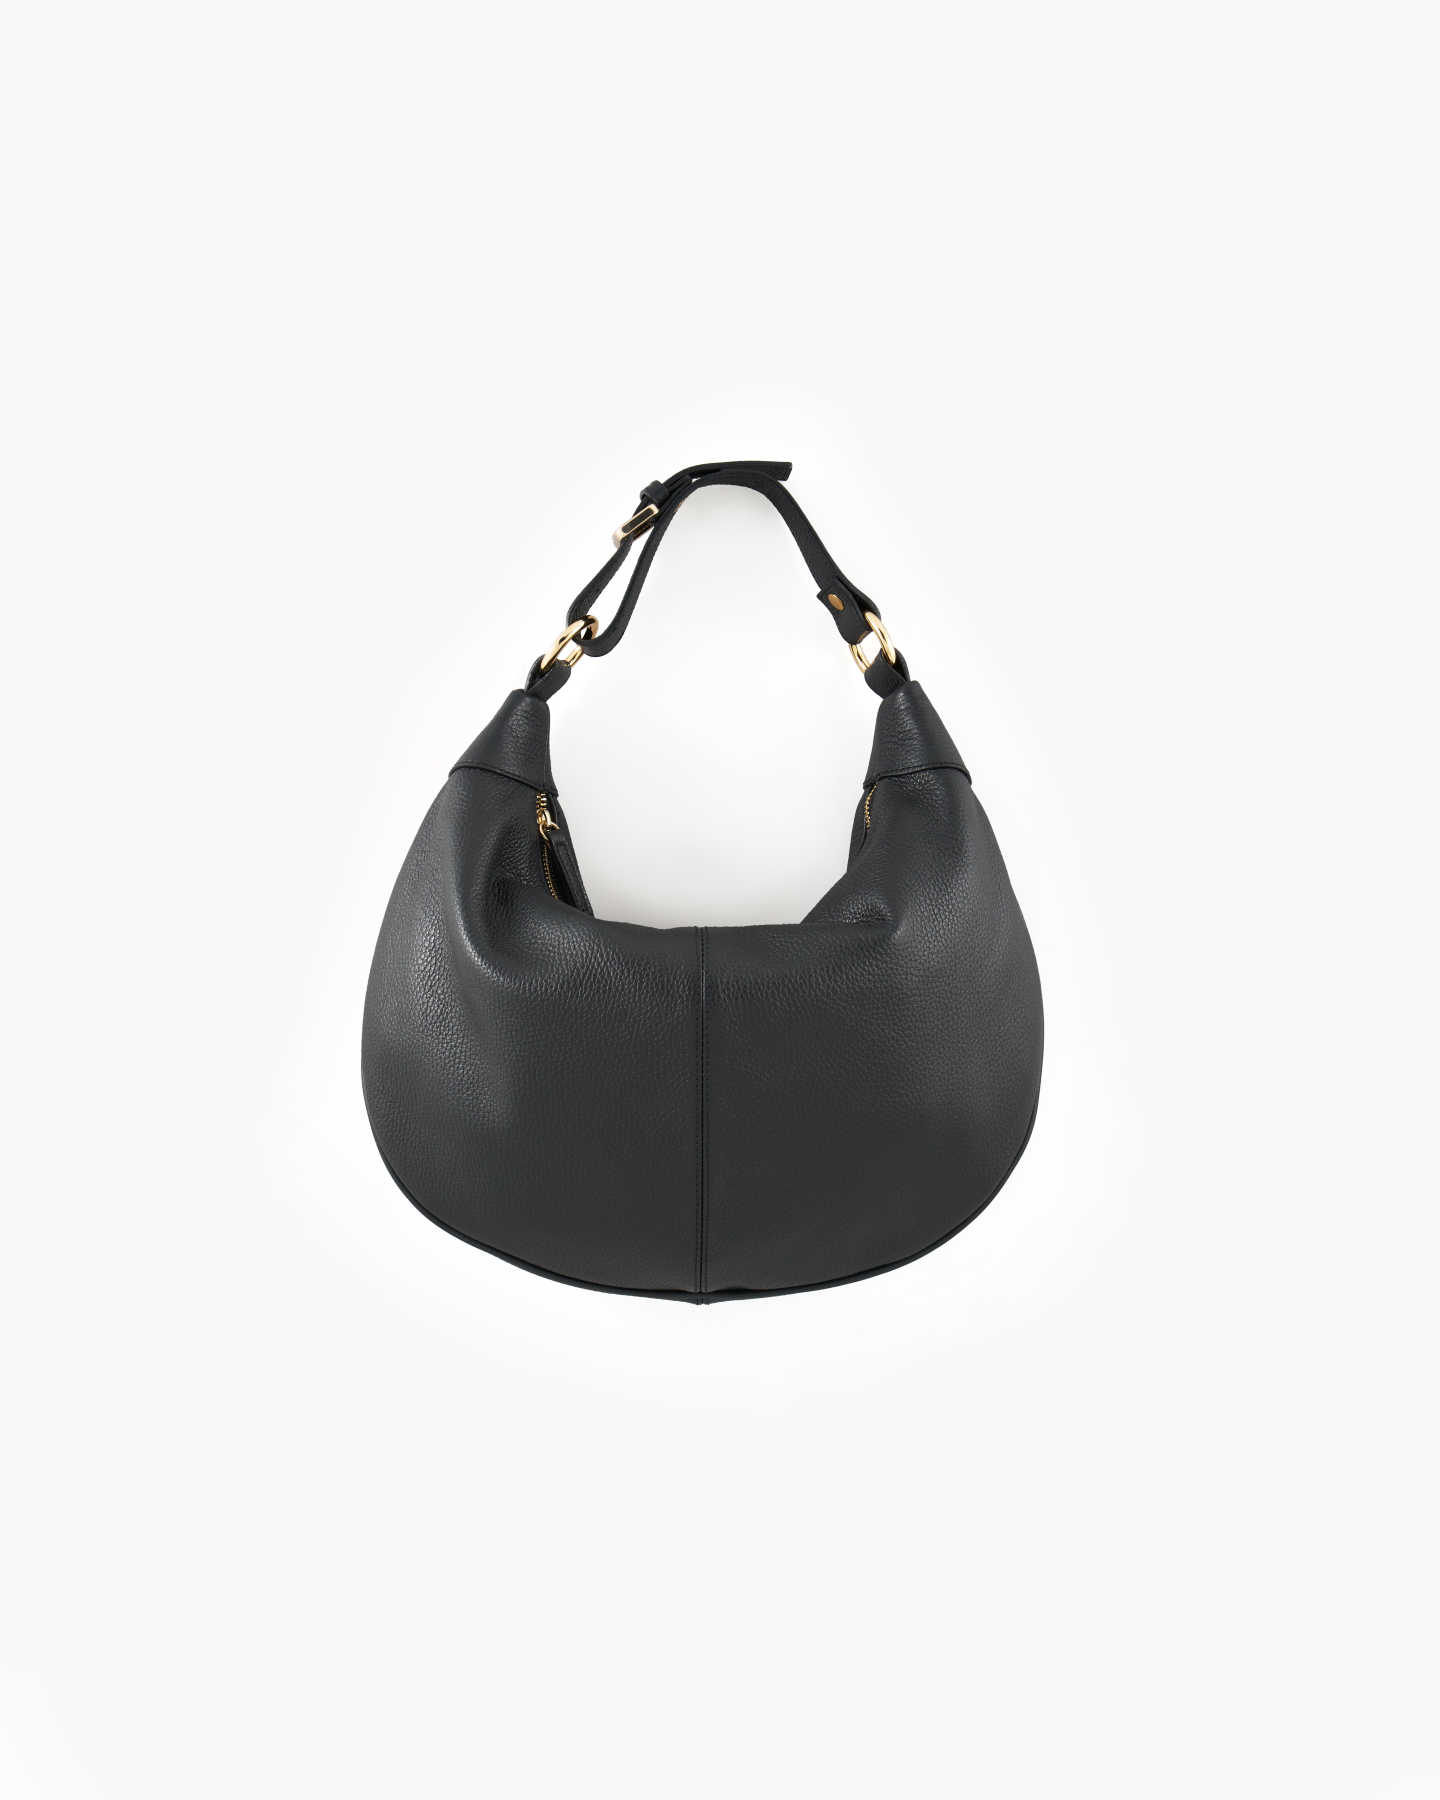 Leather Totes, Crossbody Bags, & Goods | Quince